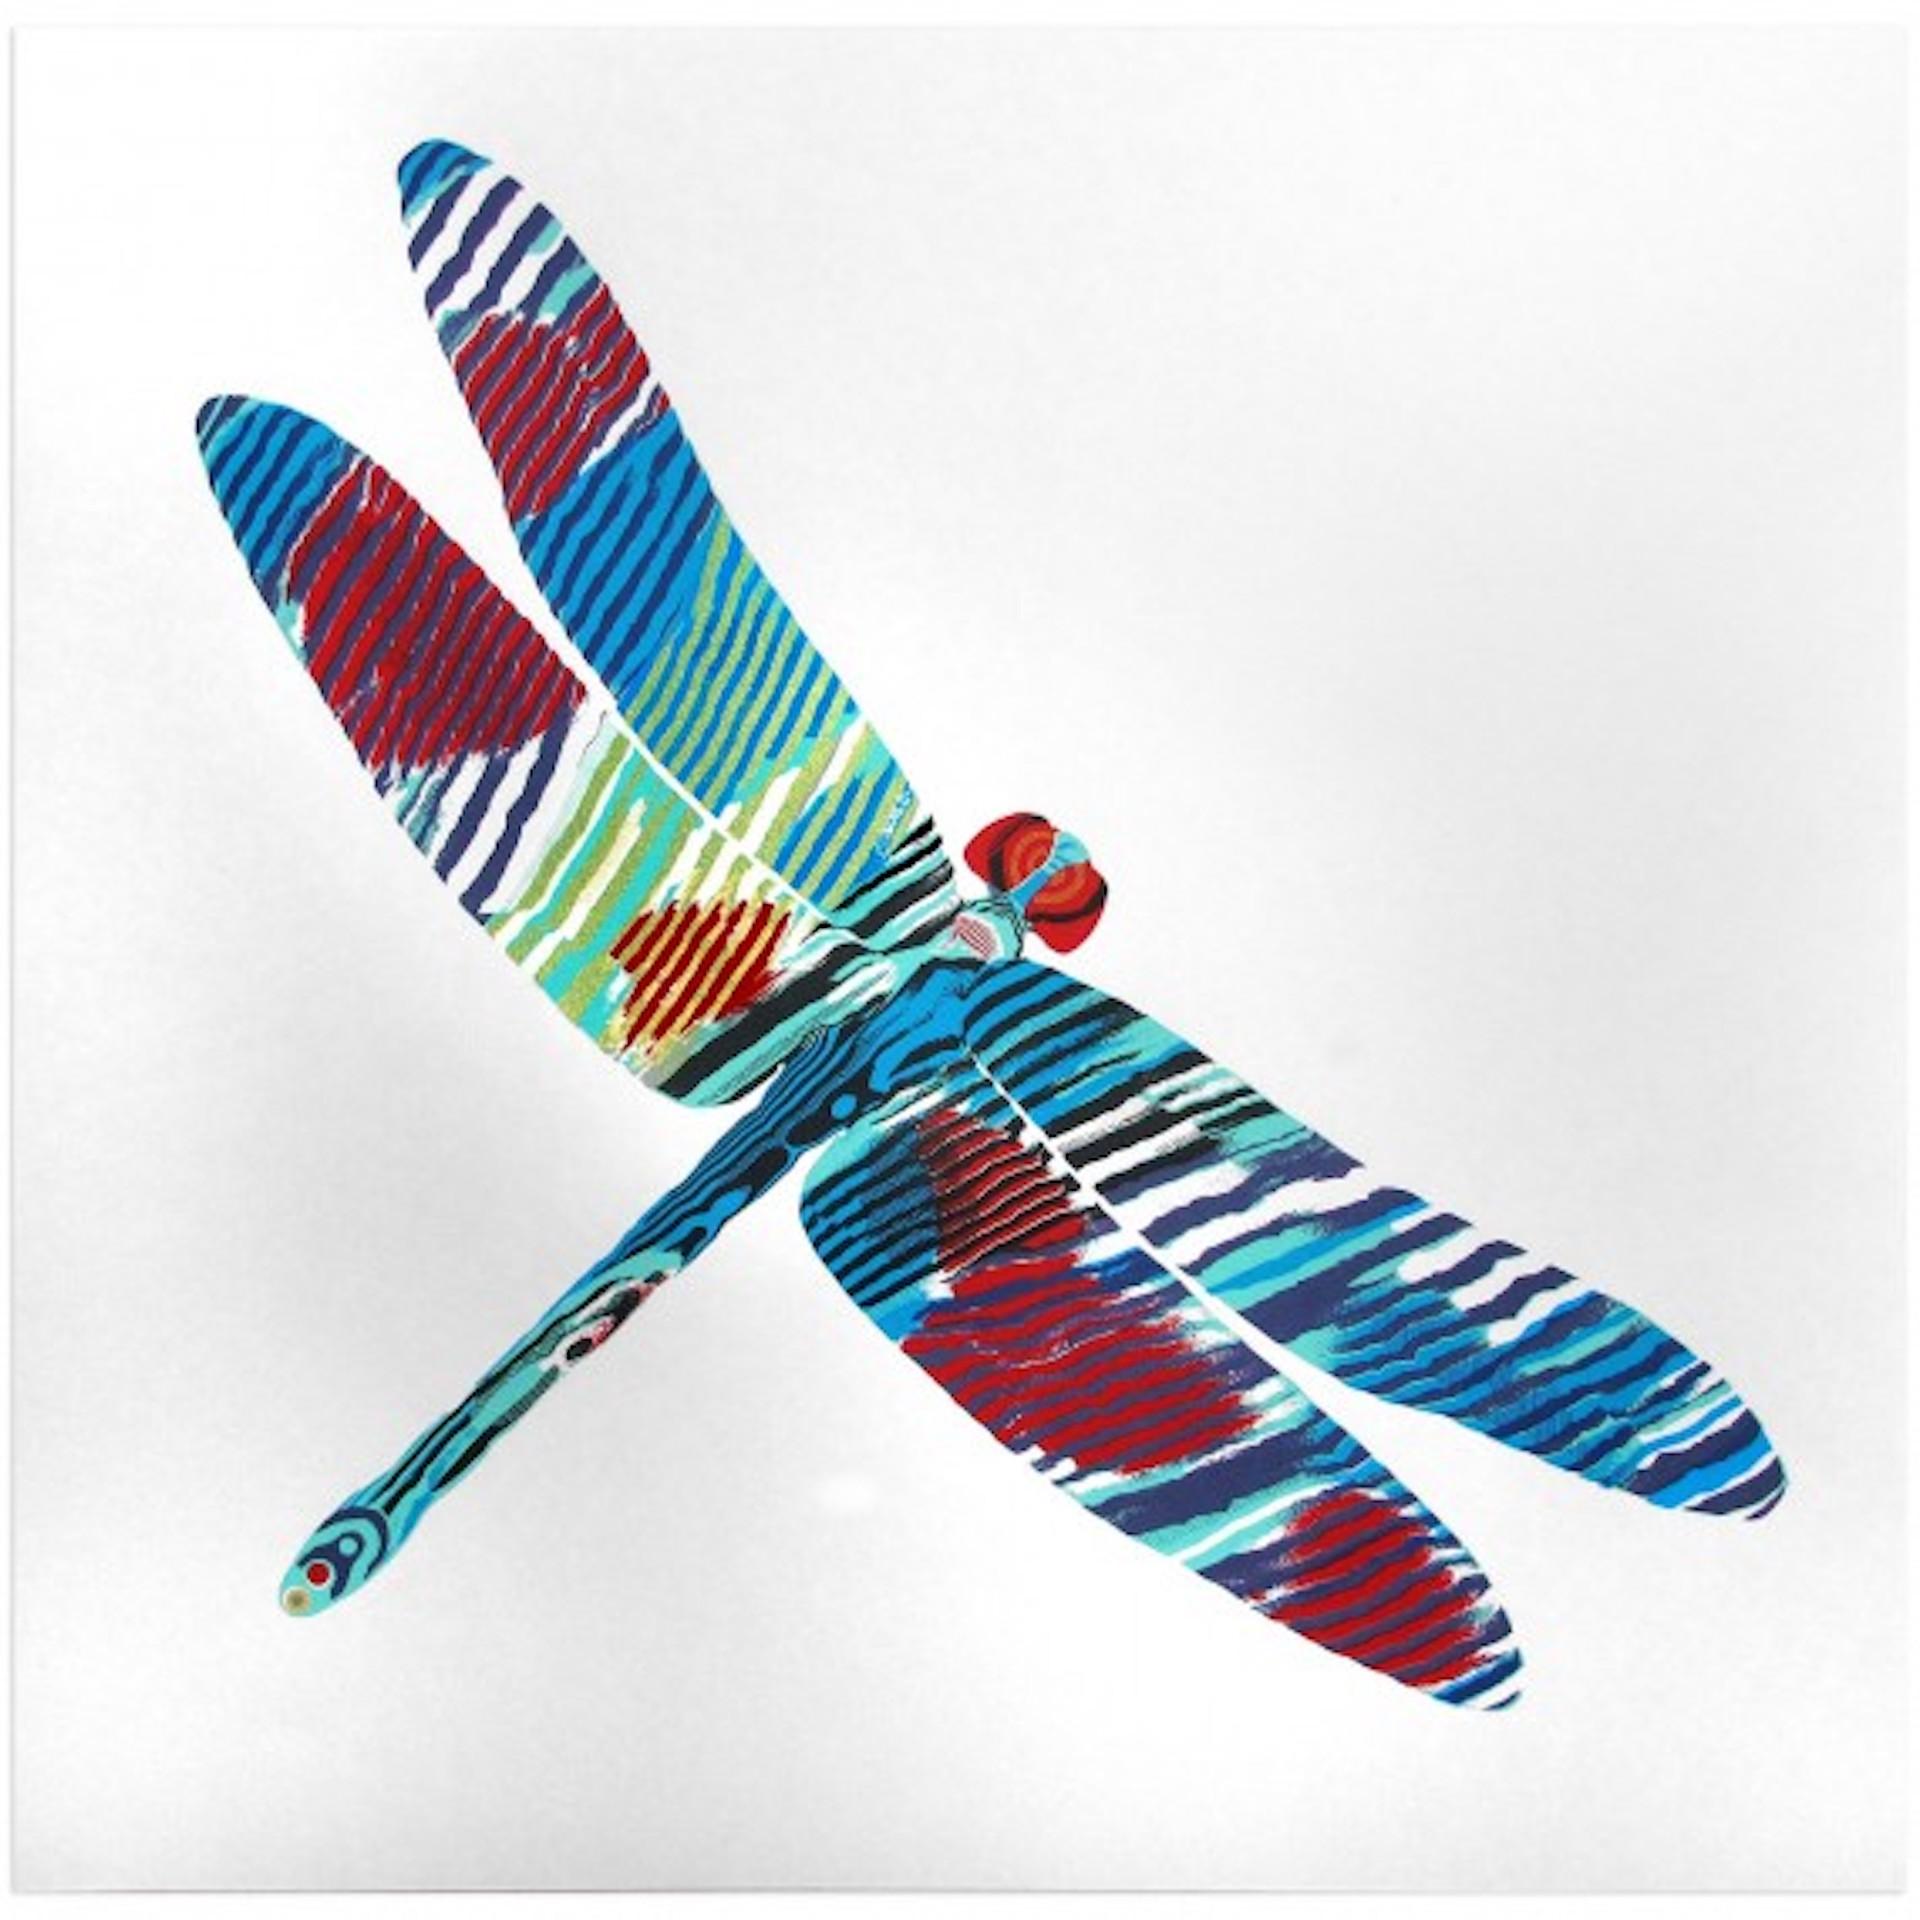 Chris Keegan Abstract Print - Dragonfly, Limited Edition Print, Colourful Animal Art, Wildlife Insect Art